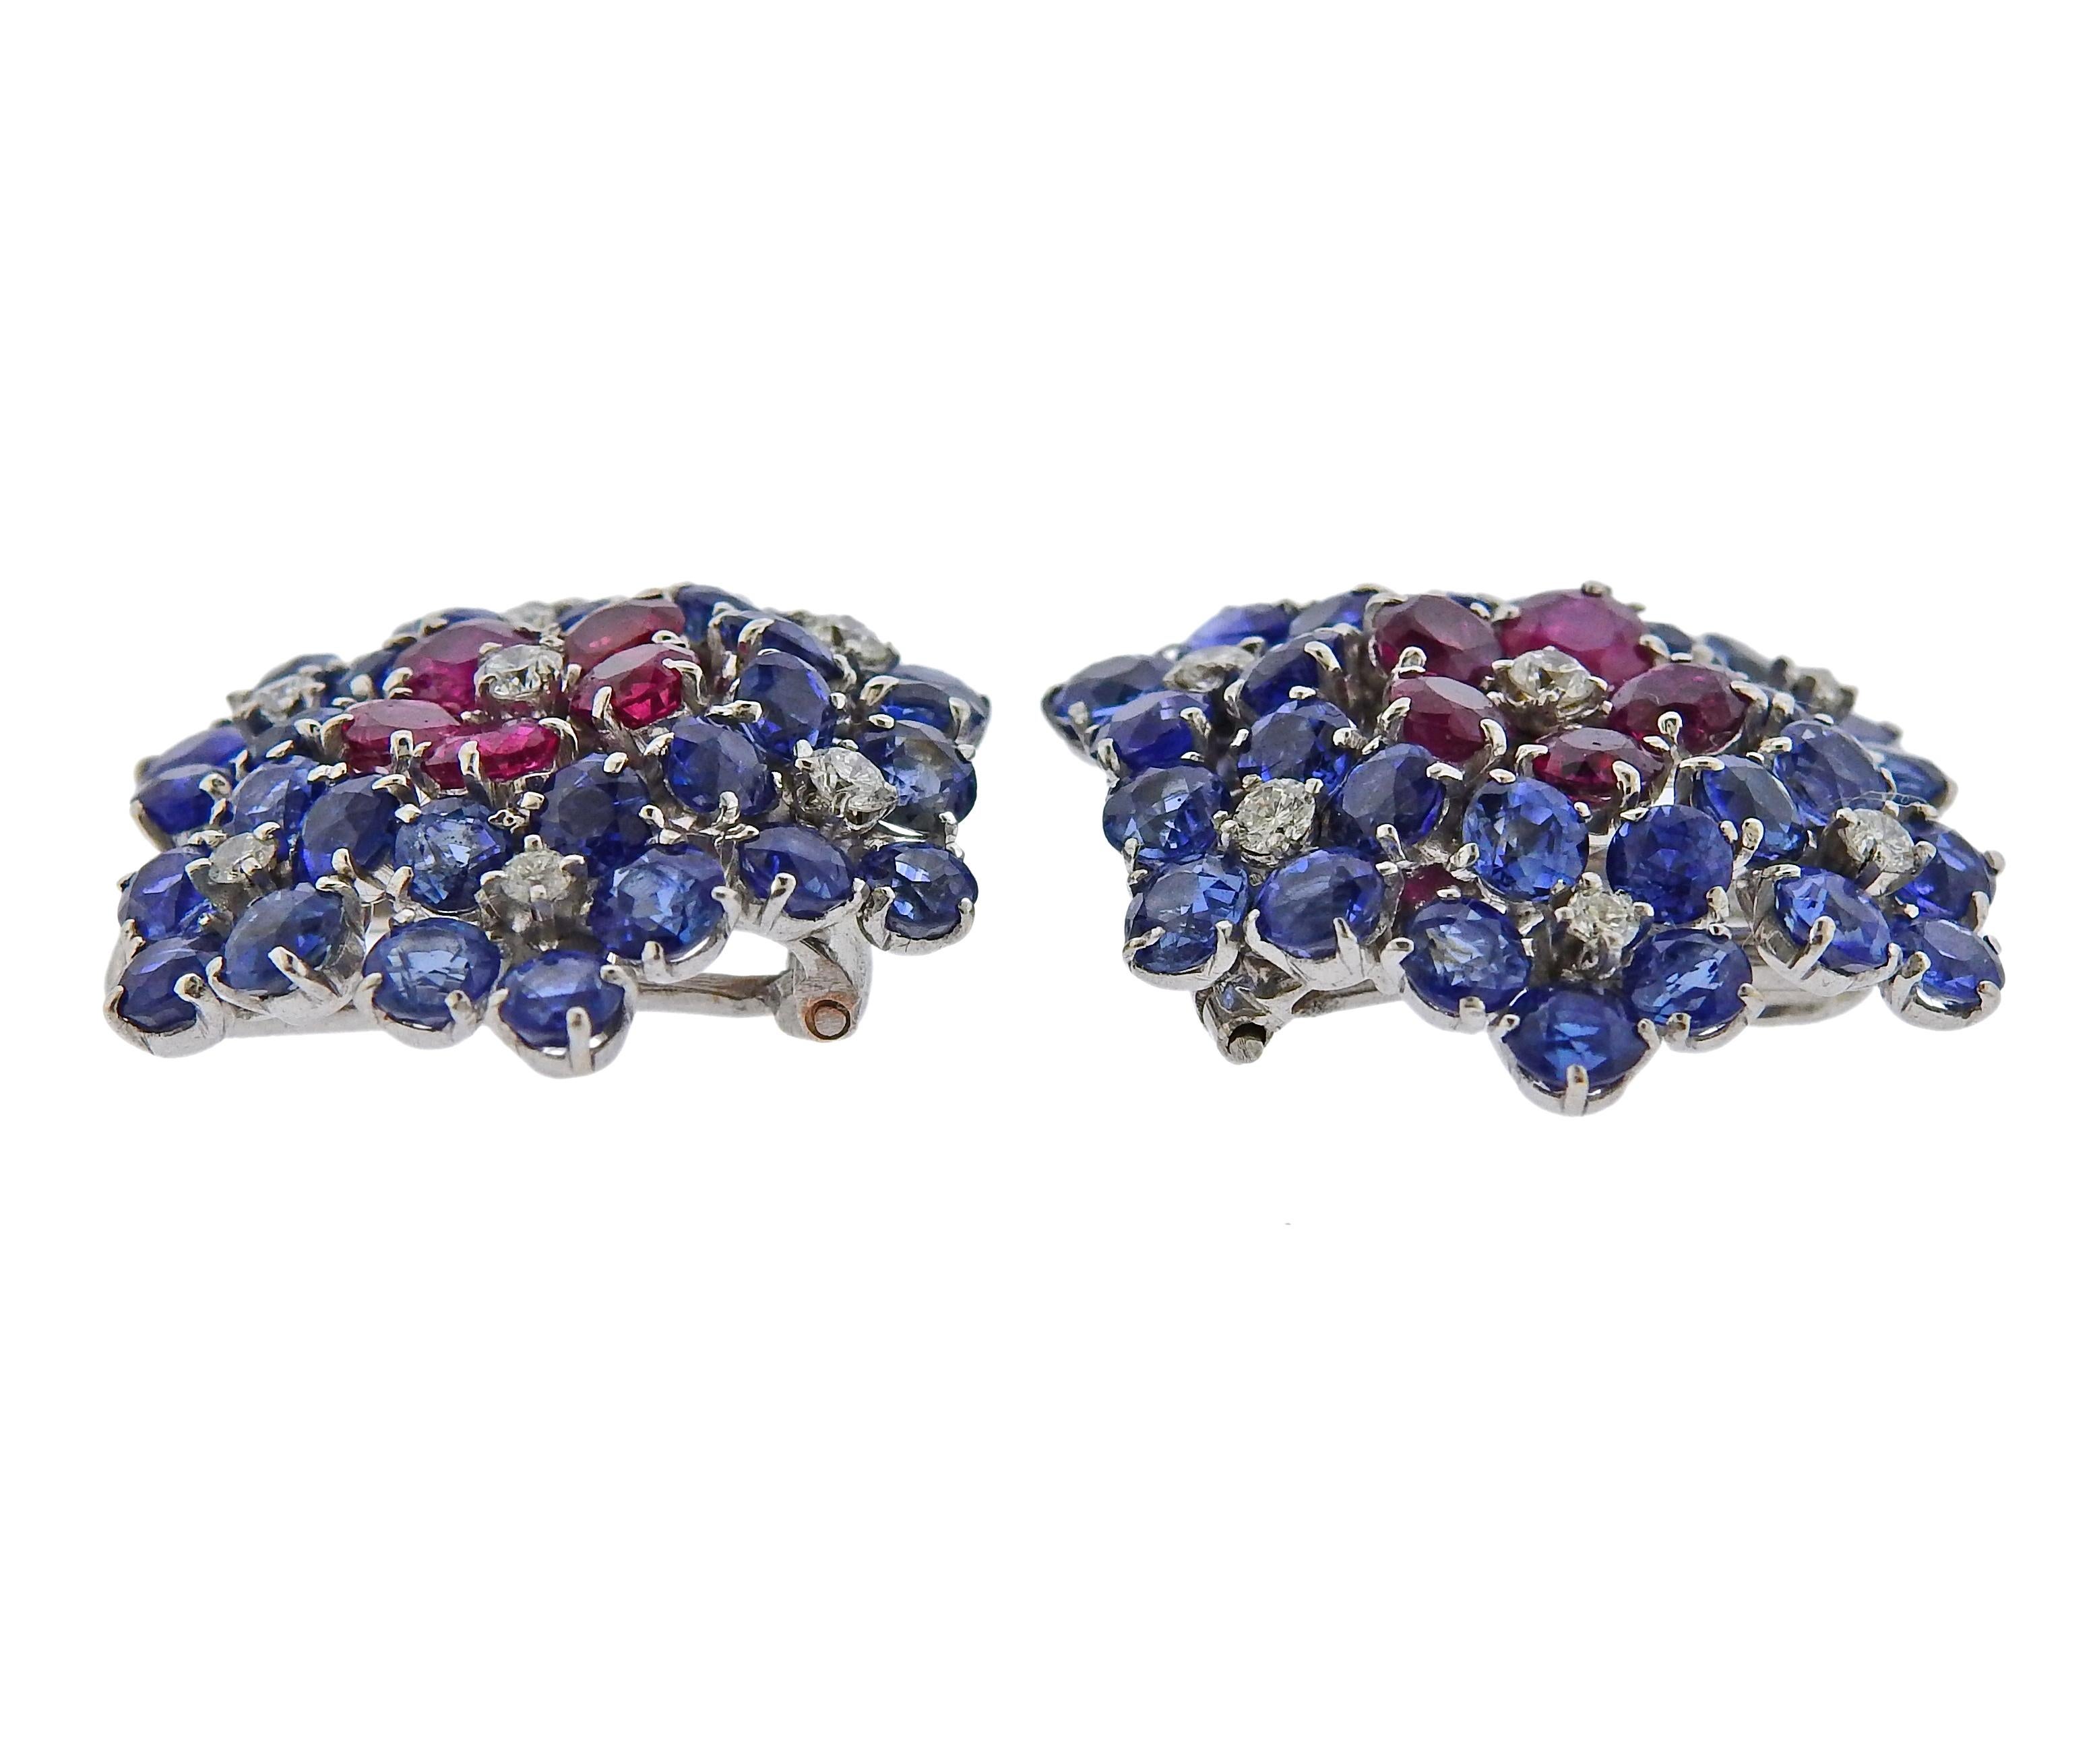 Pair of circa 1940s Van Clef & Arpels rose gold rhodium plated flower earrings, can be worn as clips. Each measures 22mm x 22mm, set with approx. 8.50ctw in blue sapphires, 1.60ctw in rubies and approx. 0.45ctw in diamonds. Marked Van Cleef &